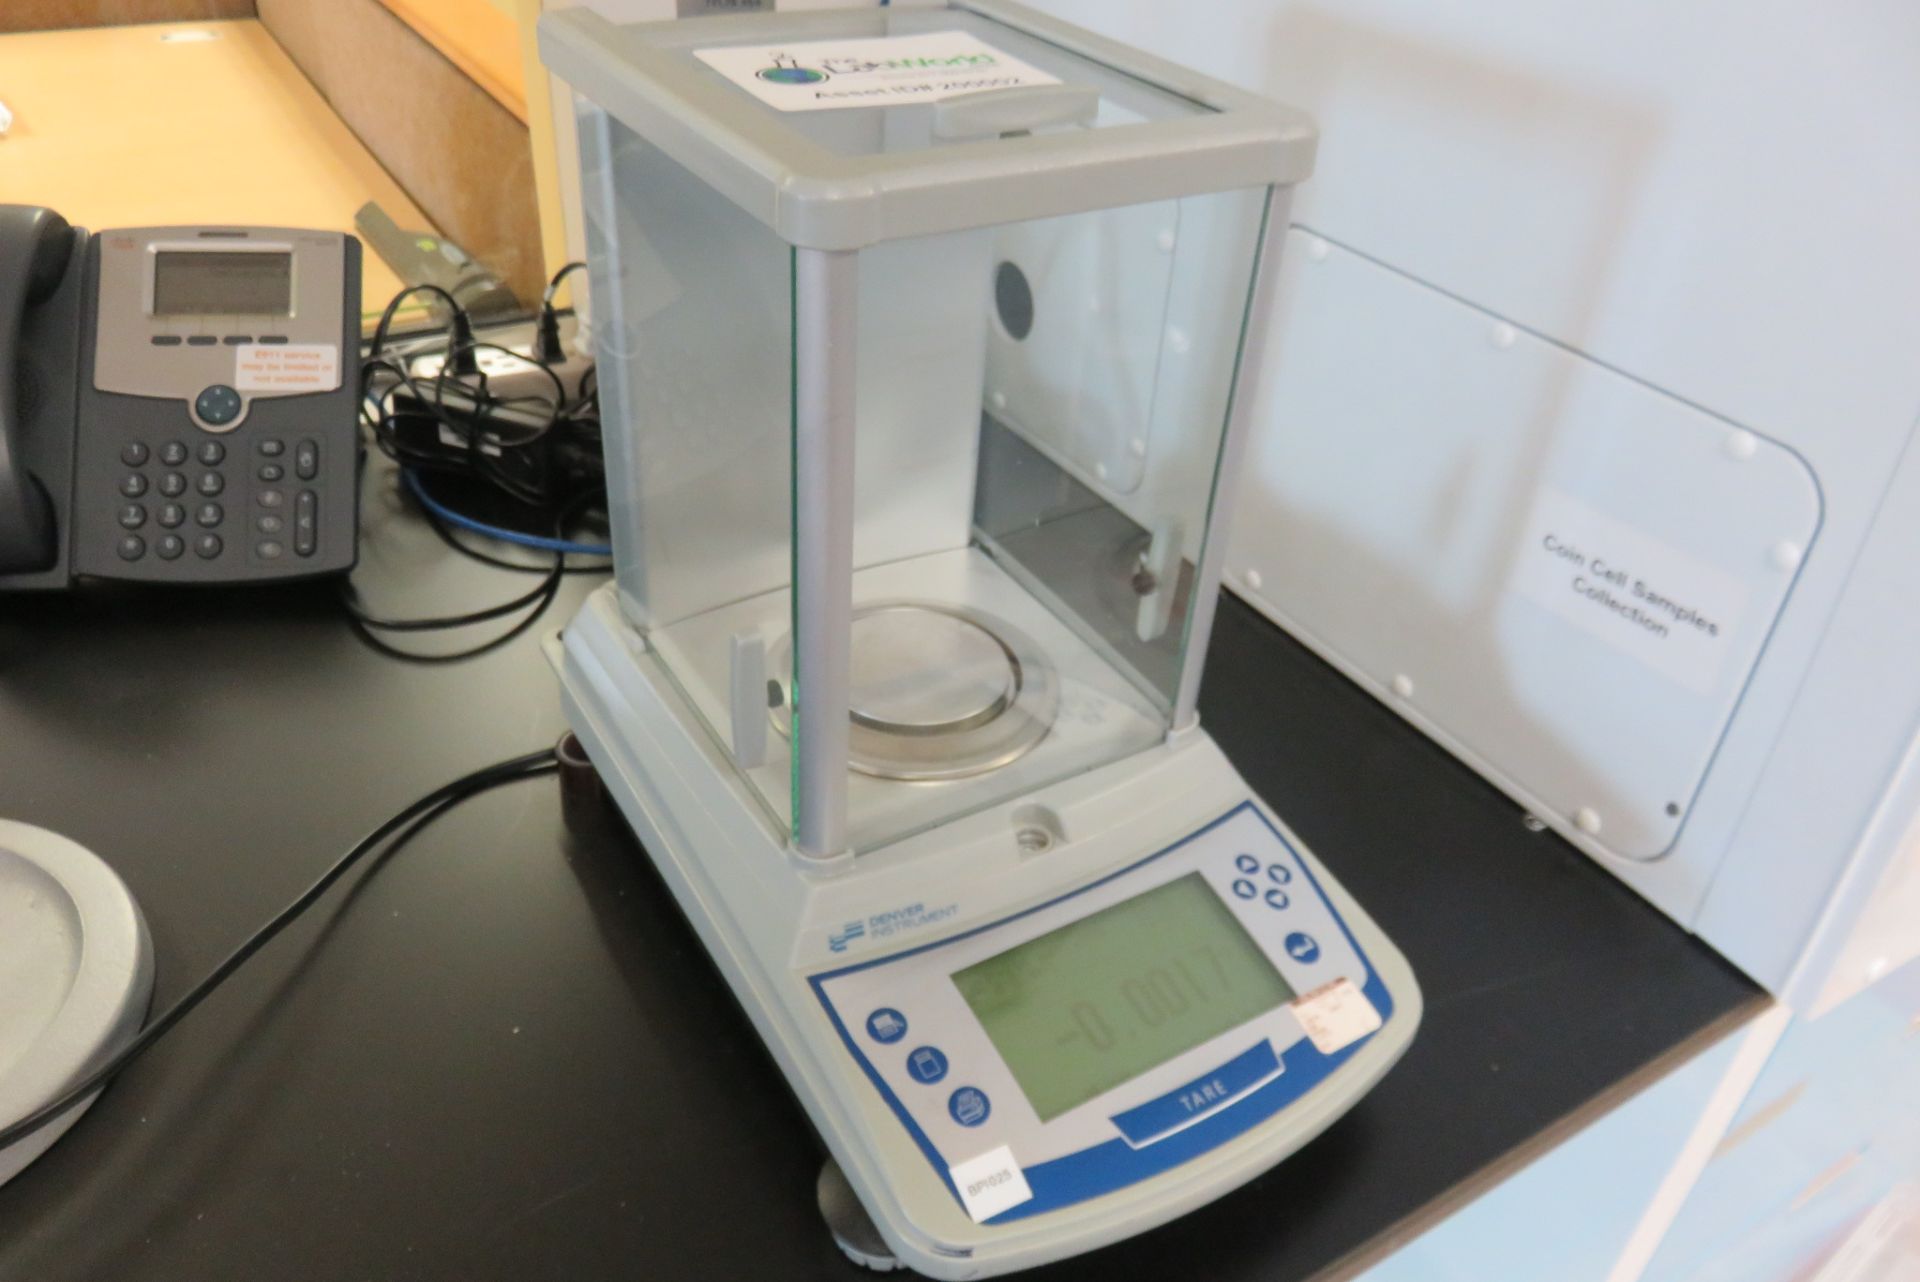 Denver Instruments Analytical Balance with weigh pan, draft shield and power adapter